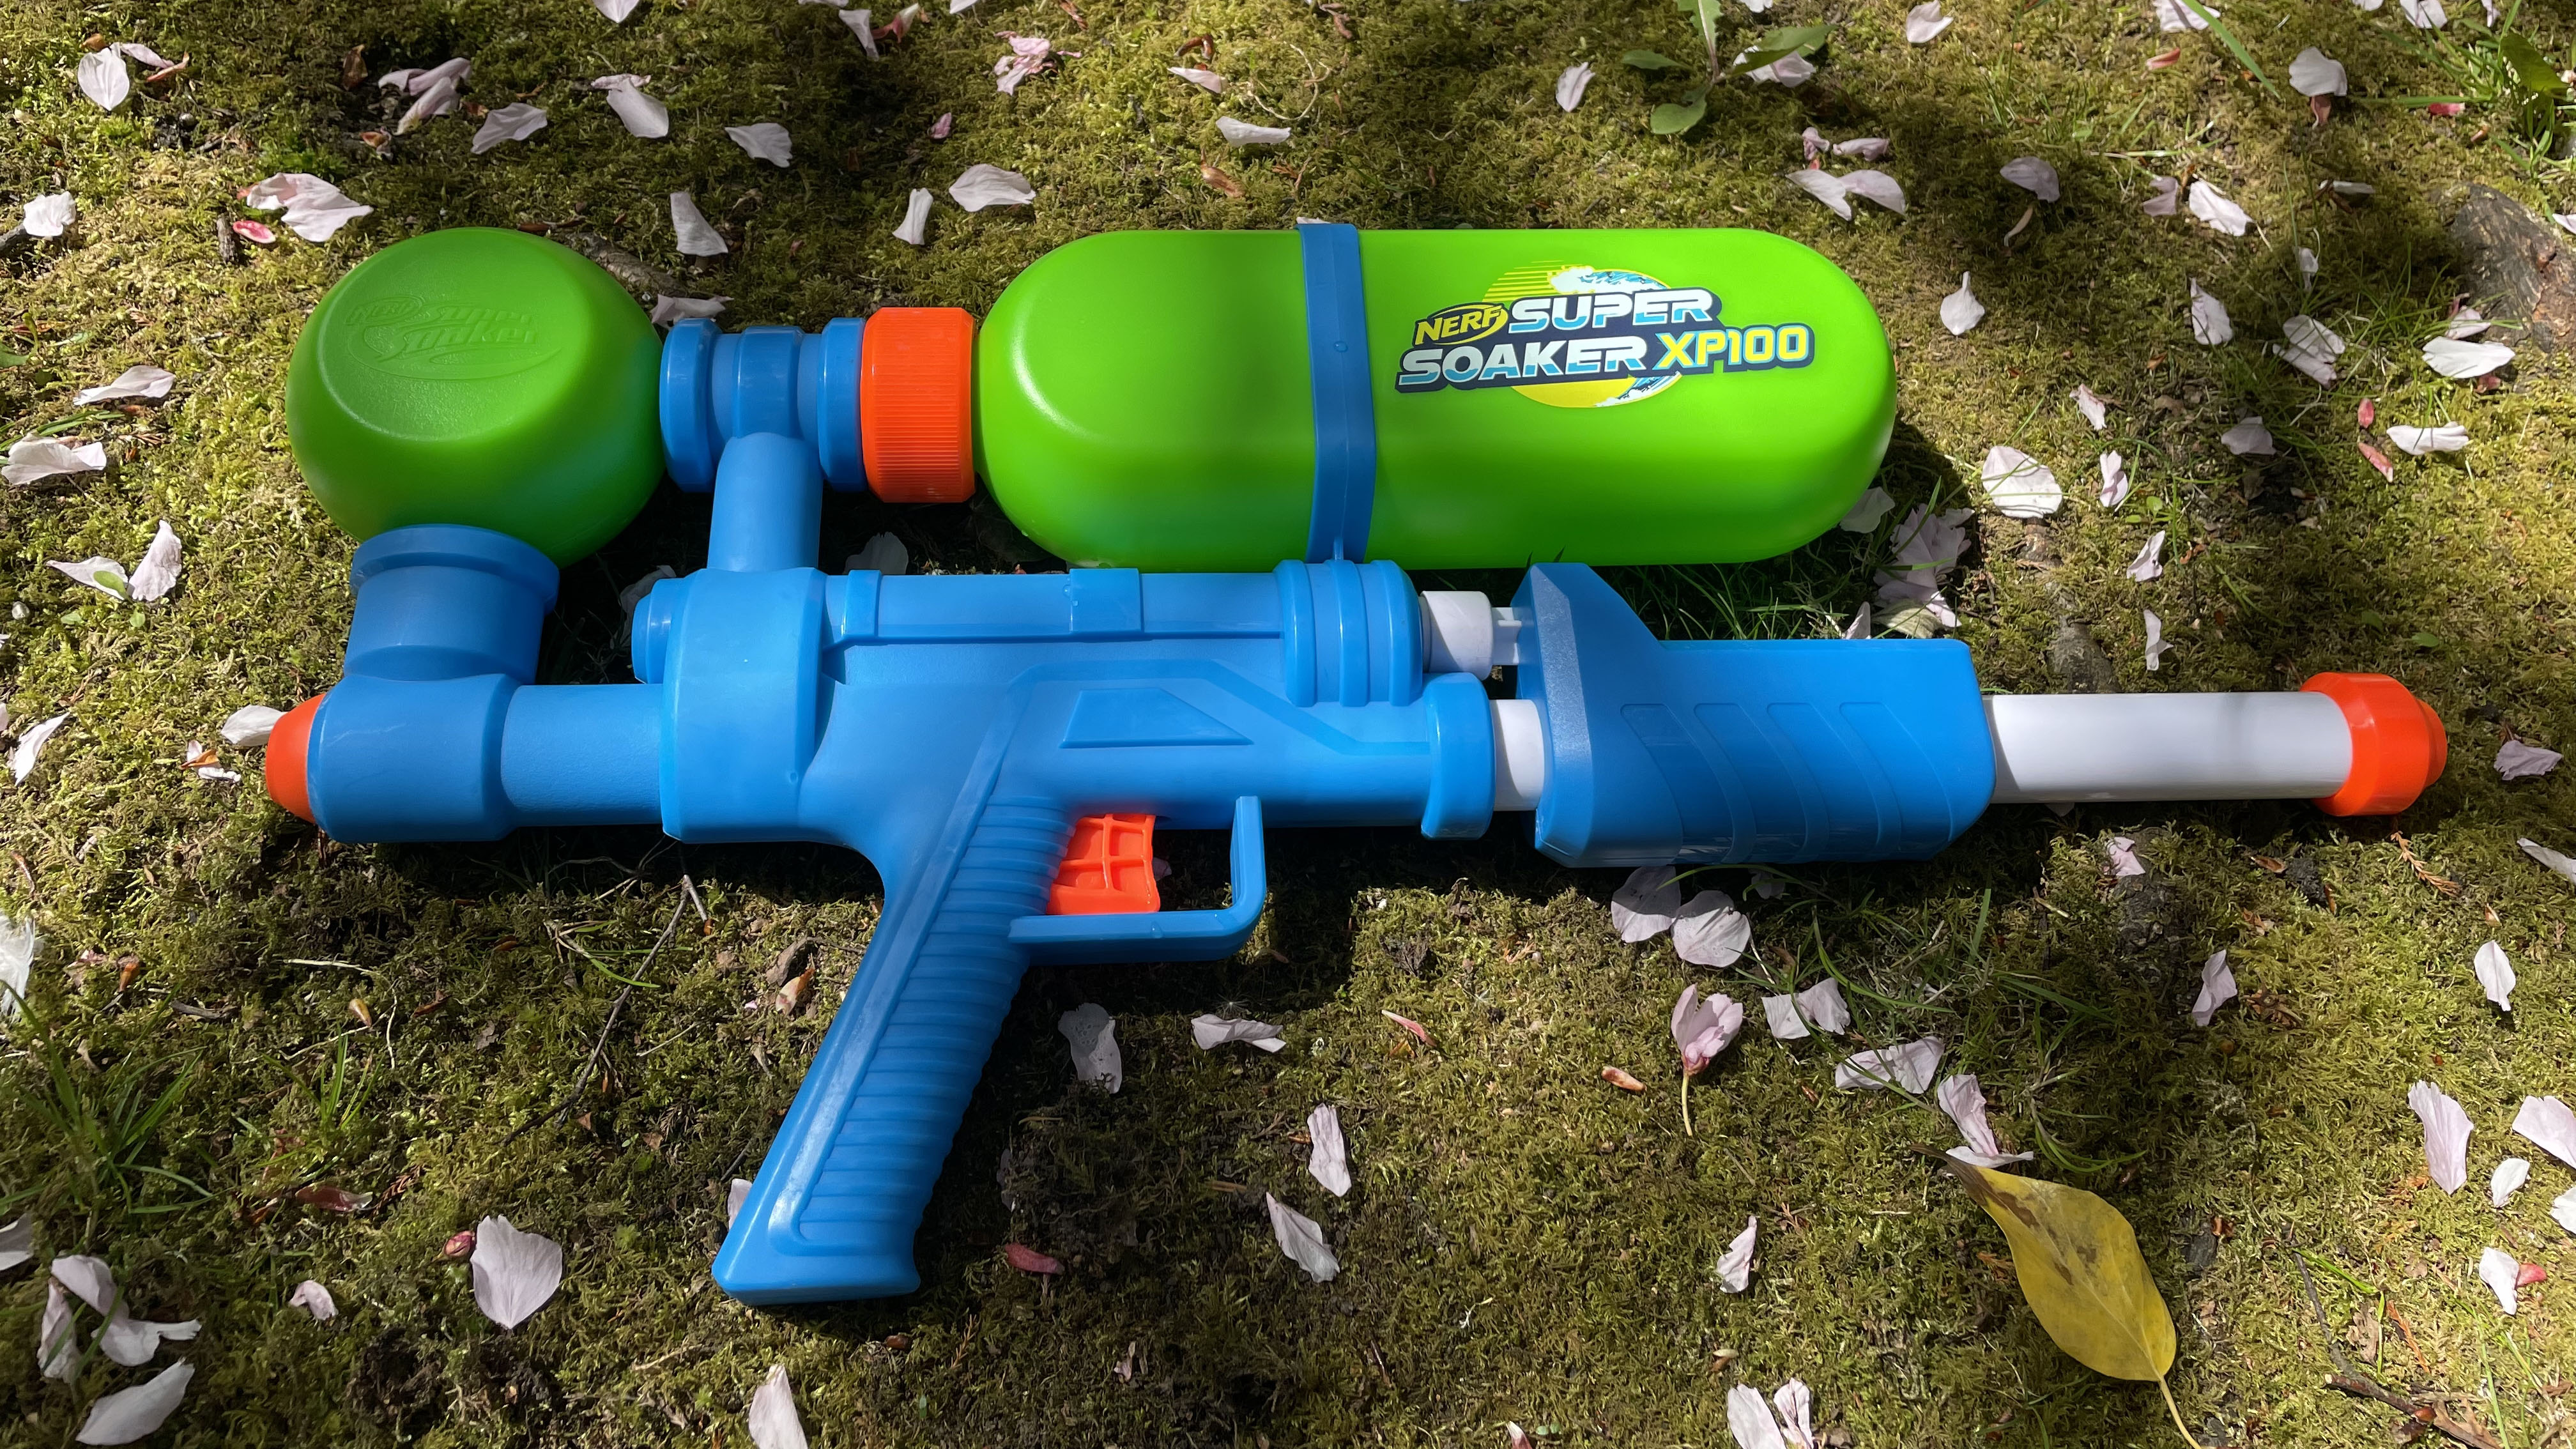 Super Soaker Xp100 Review A Classic Returns But With One Problem T3